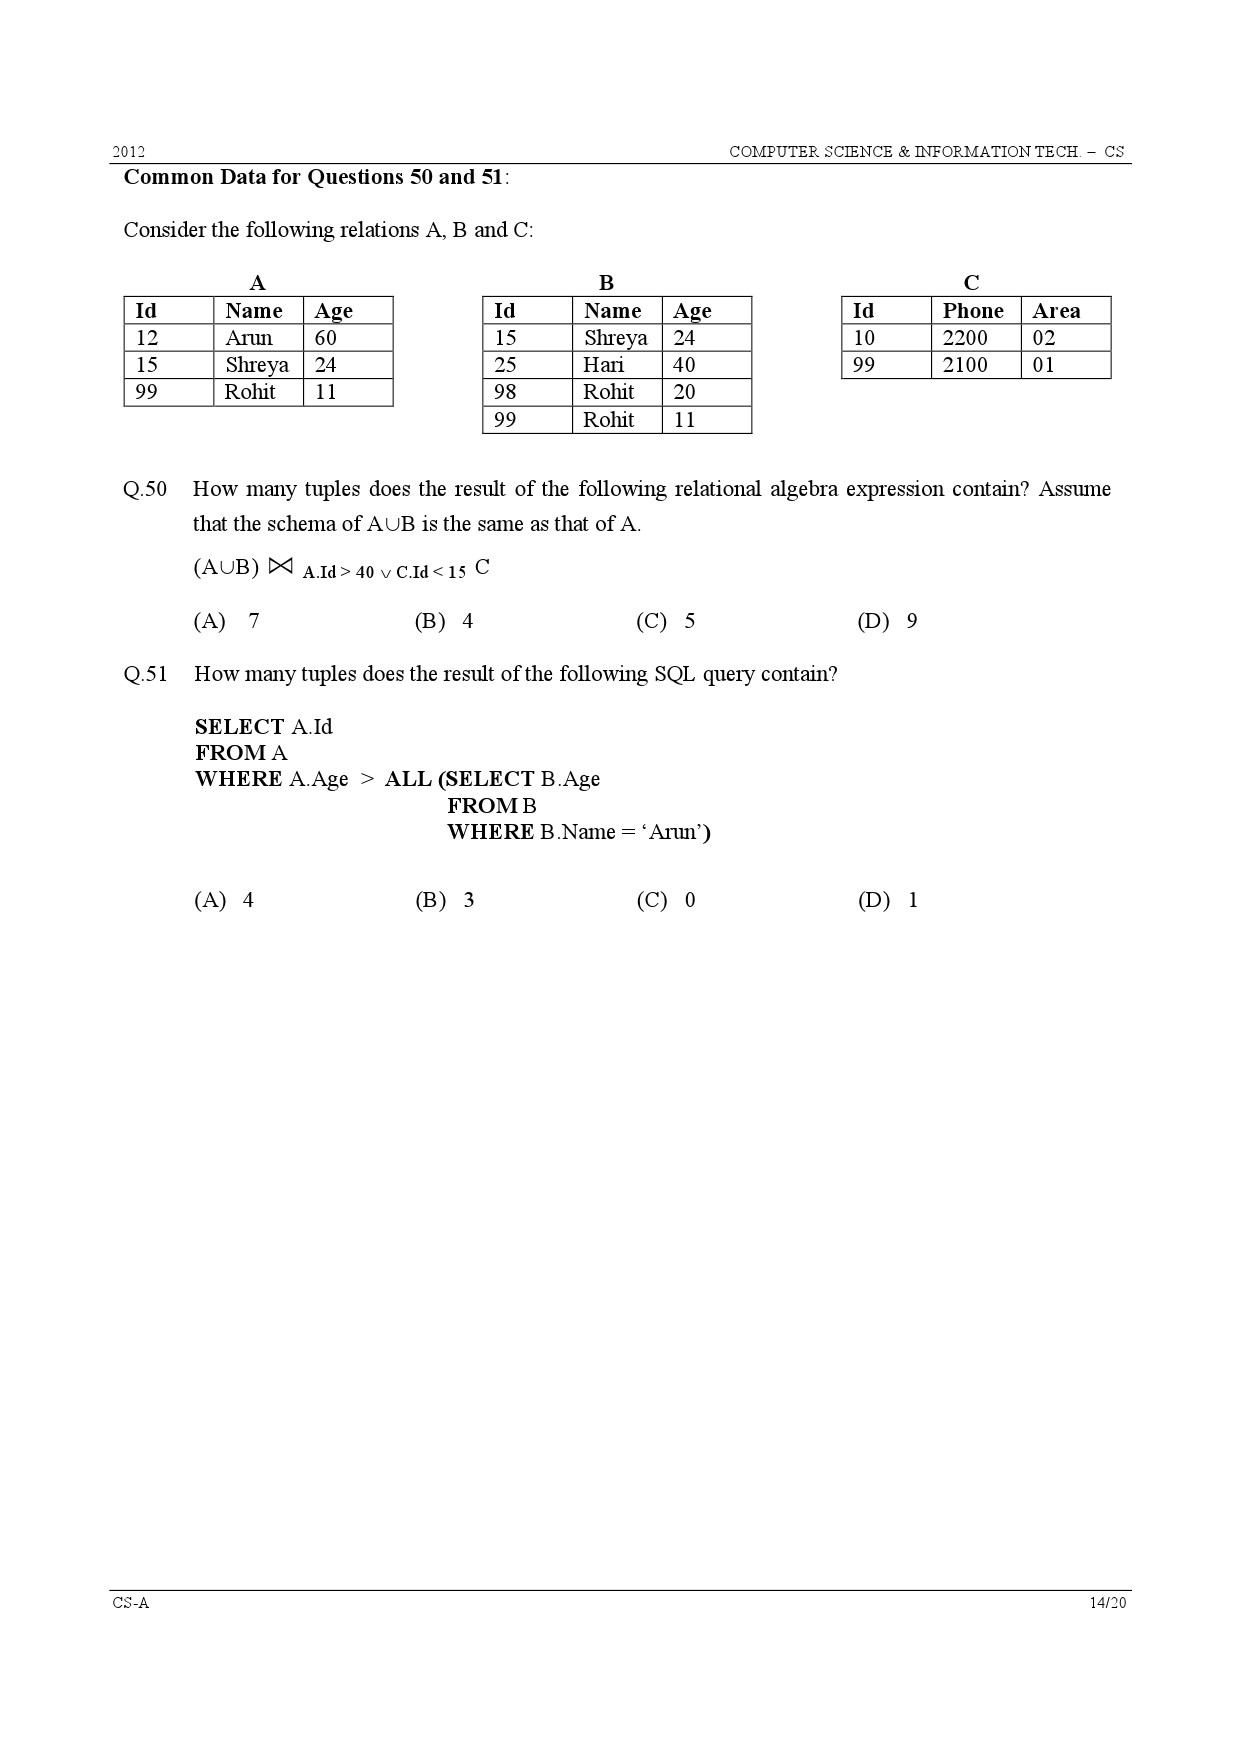 GATE Exam Question Paper 2012 Computer Science and Information Technology 14